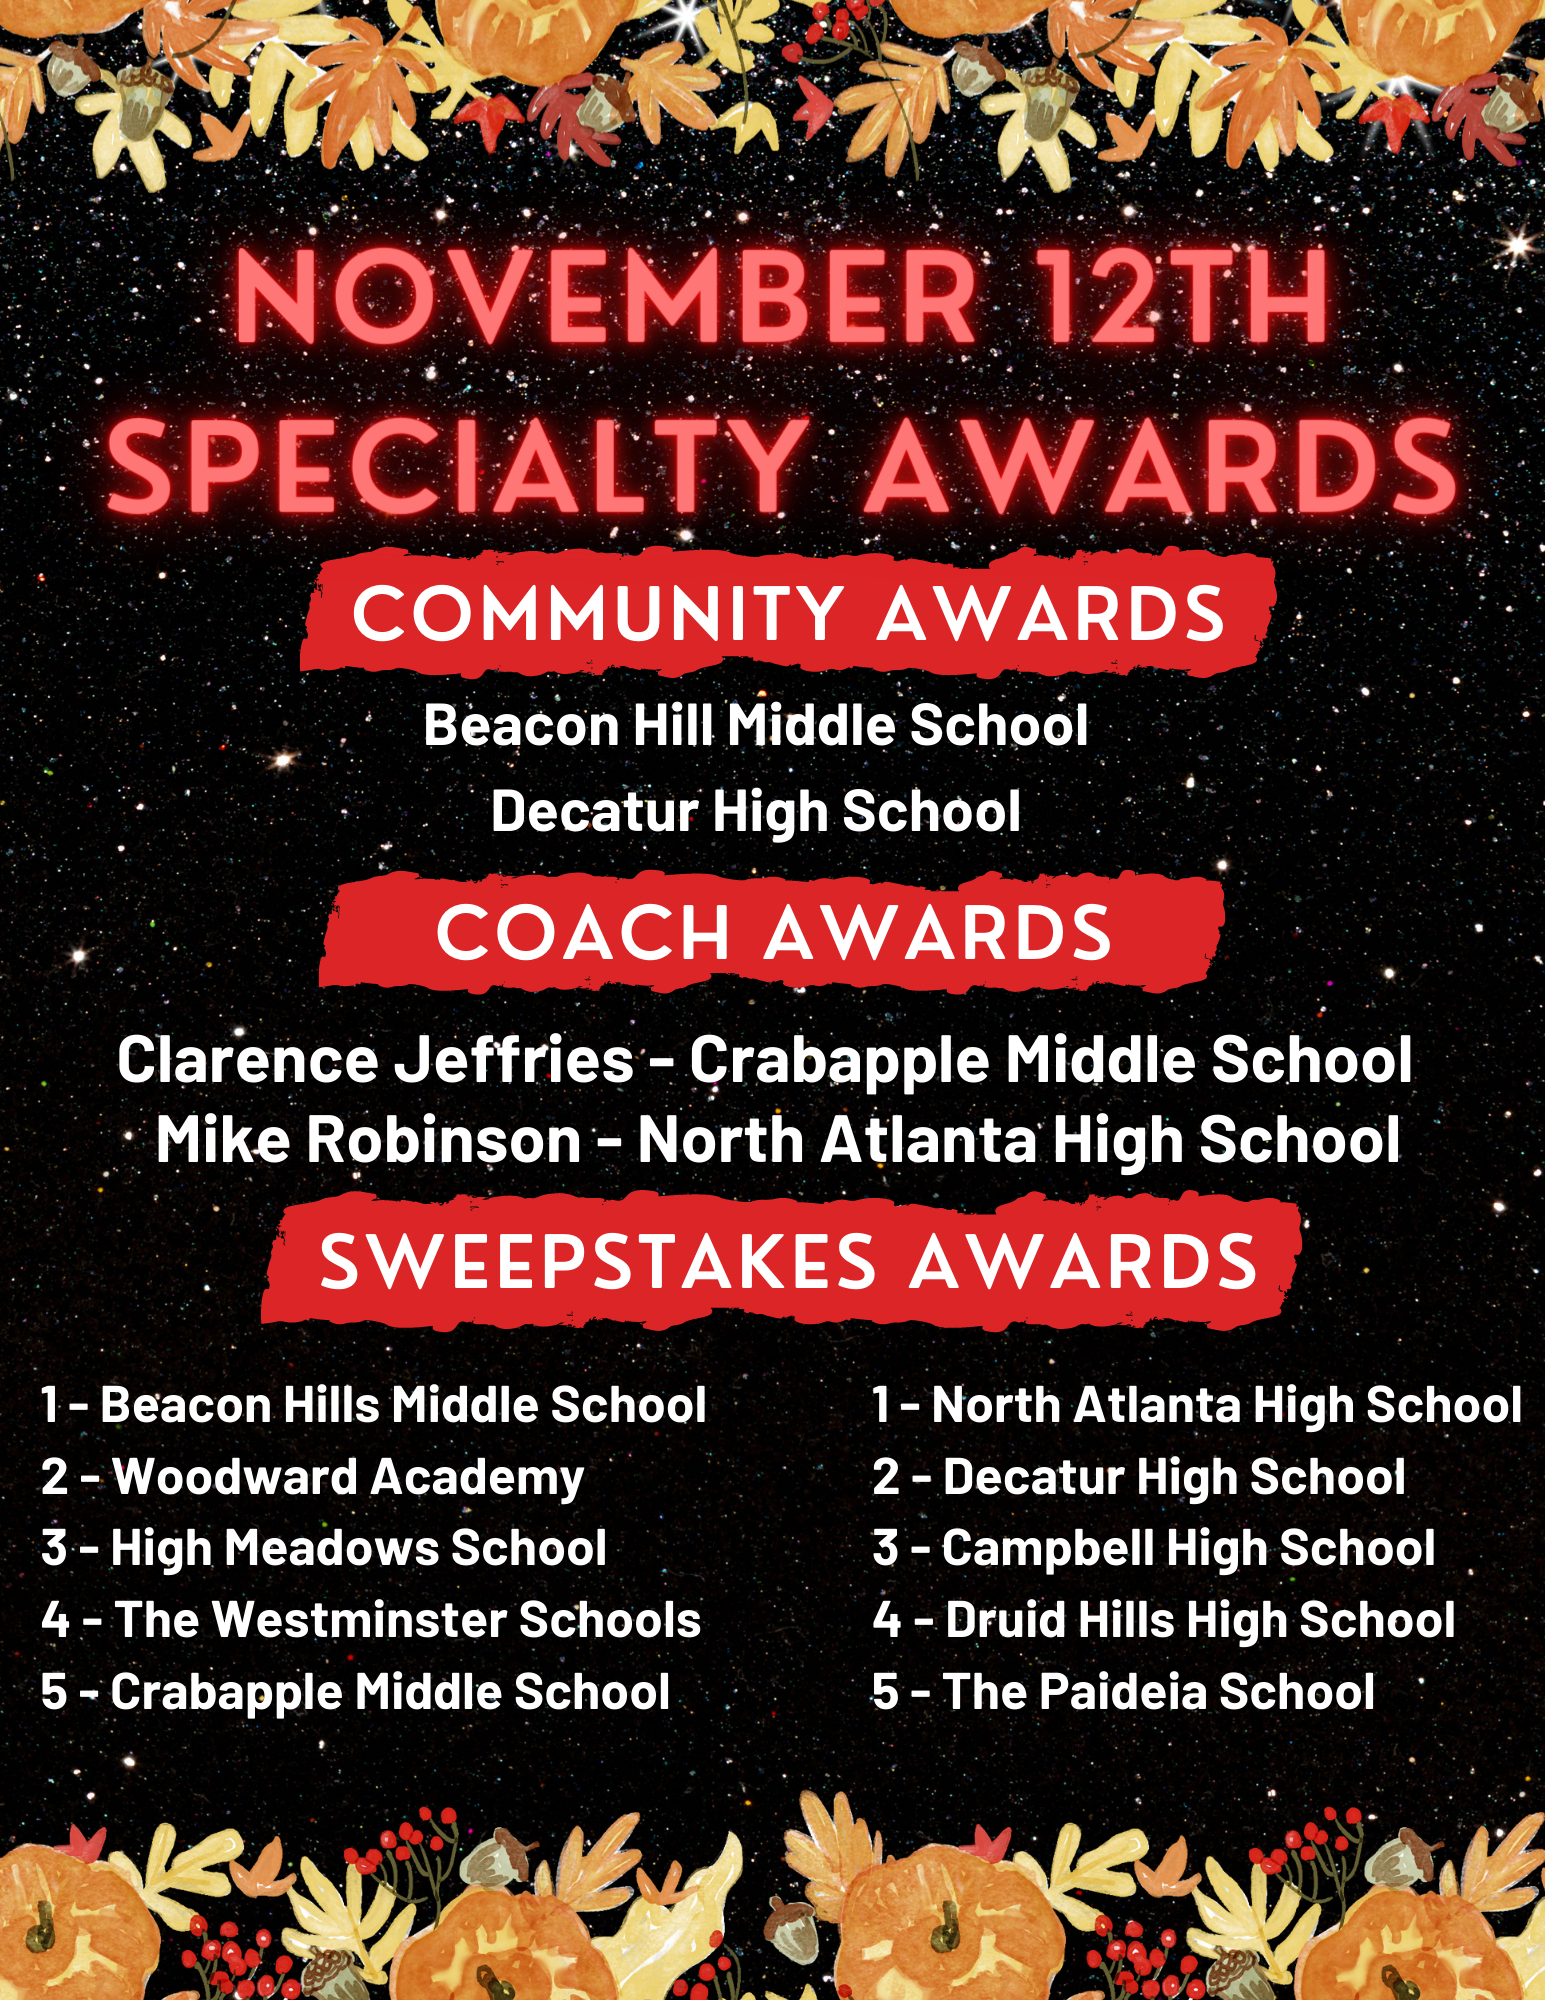 115-11-12 Specialty Awards.png